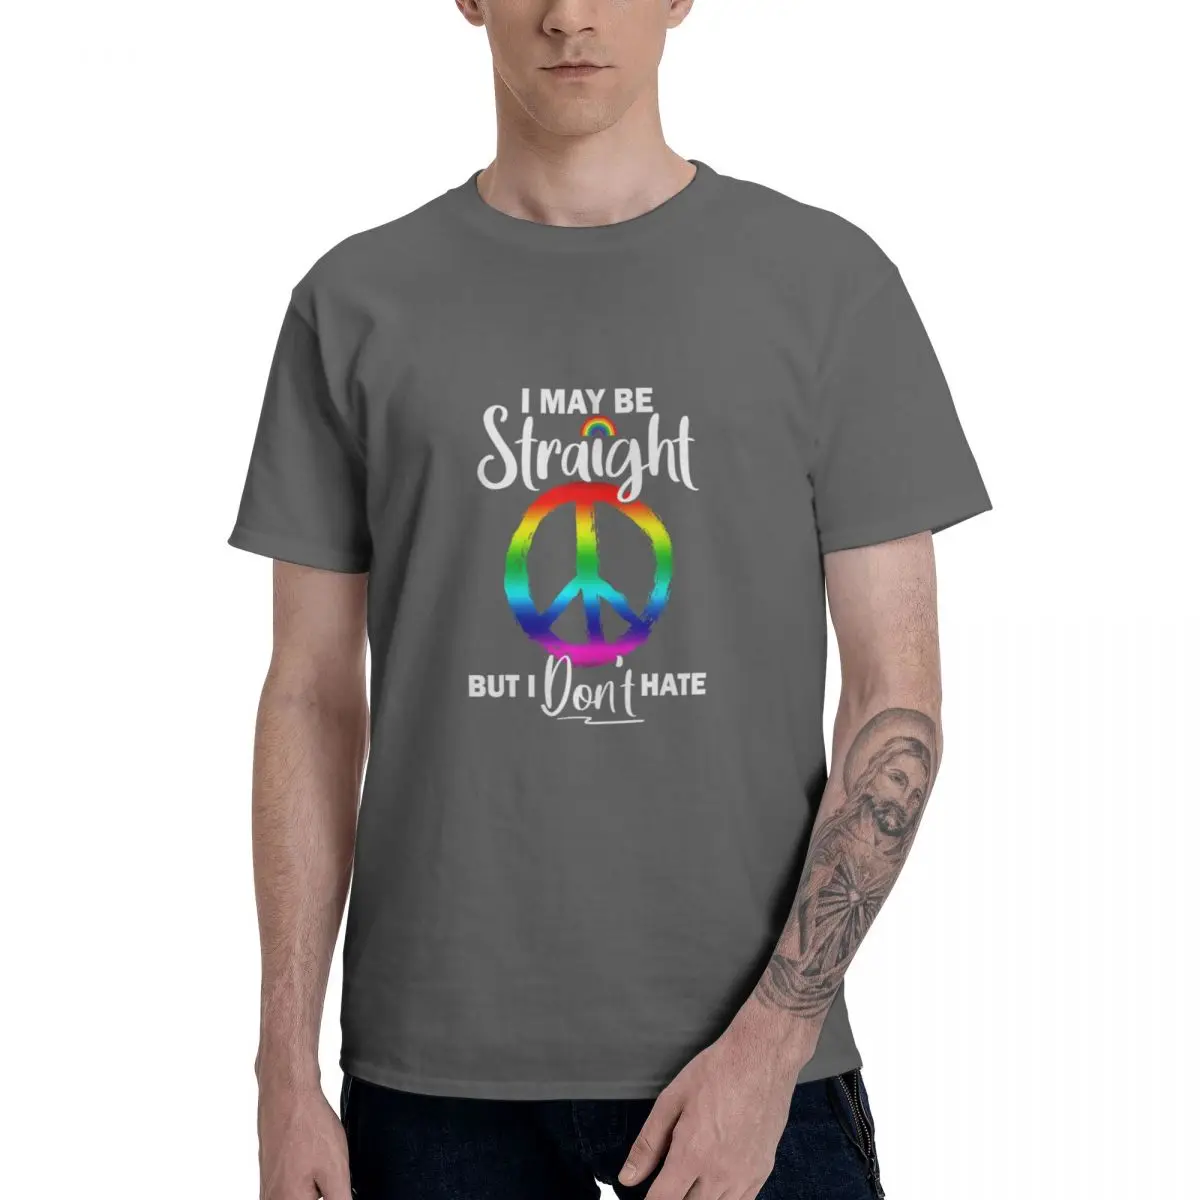 

I May Be Straight But I Dont Hate Funny LGBT Gay Graphic Tee Men's Basic Short Sleeve T-Shirt Aesthetic Clothes Funny Tops